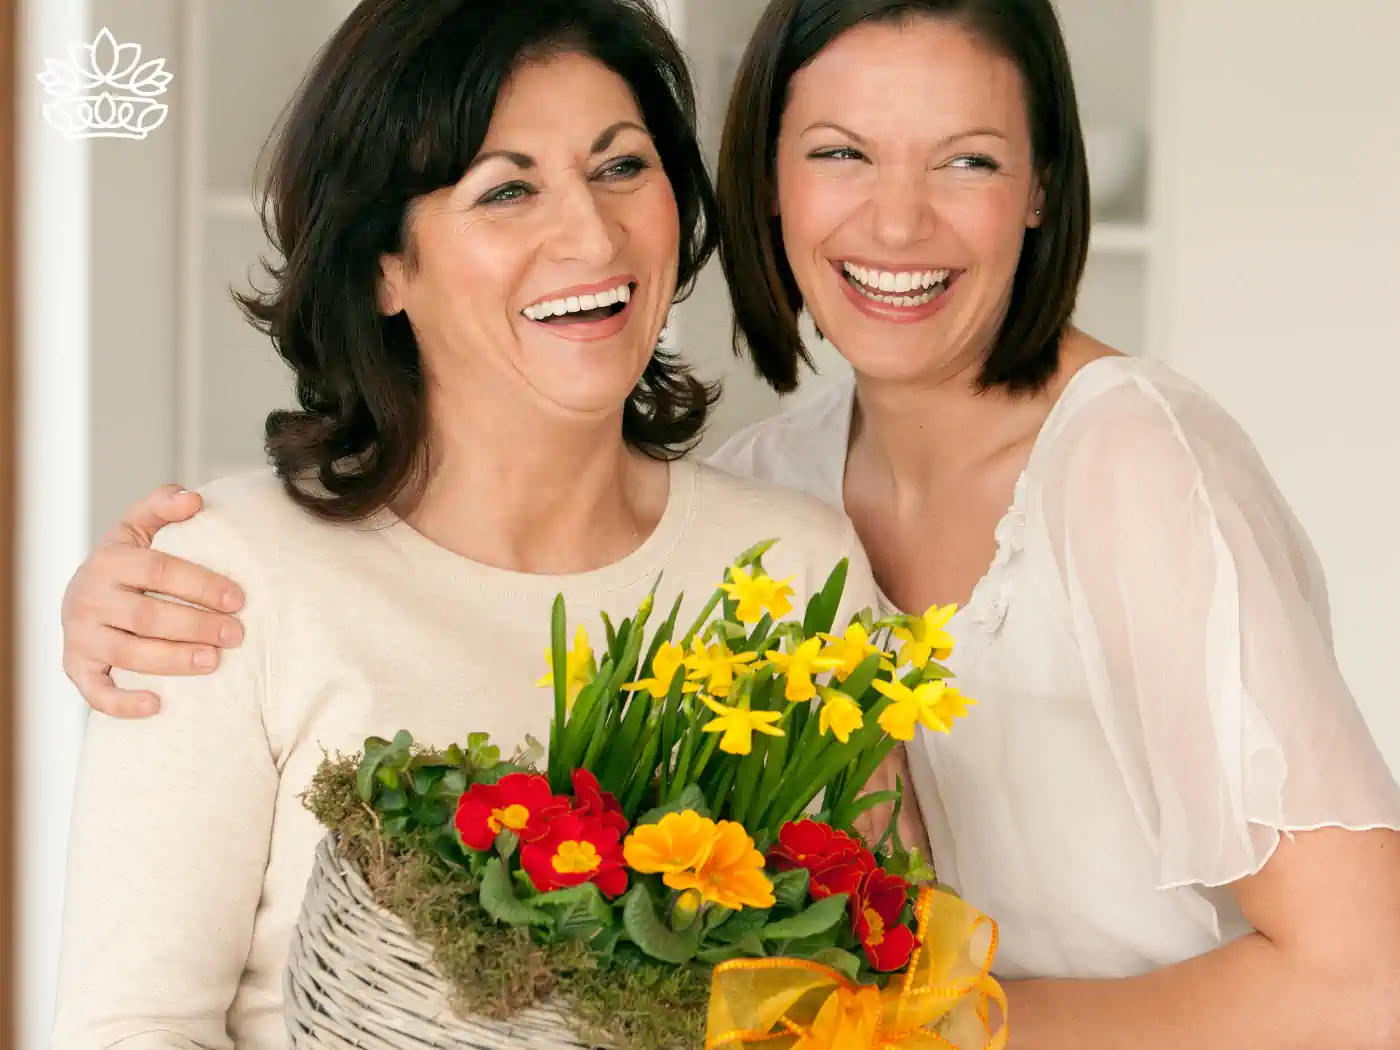 Mother and daughter sharing a joyful moment with a beautiful basket of flowers. Fabulous Flowers and Gifts